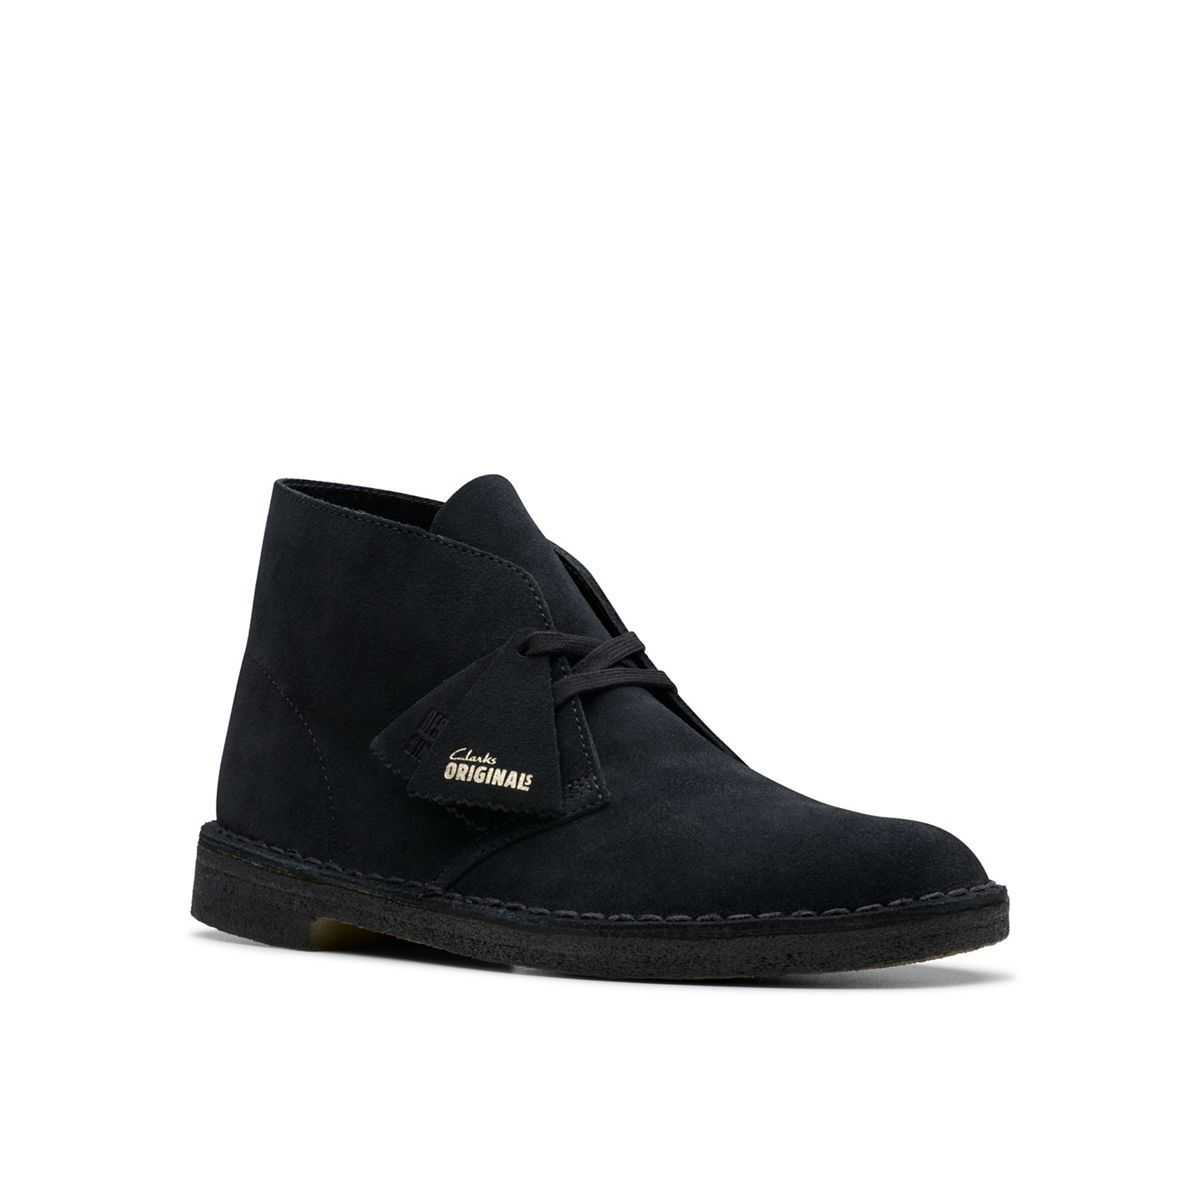 Desert Boot Black Suede - Clarks Canada | Clarks Shoes